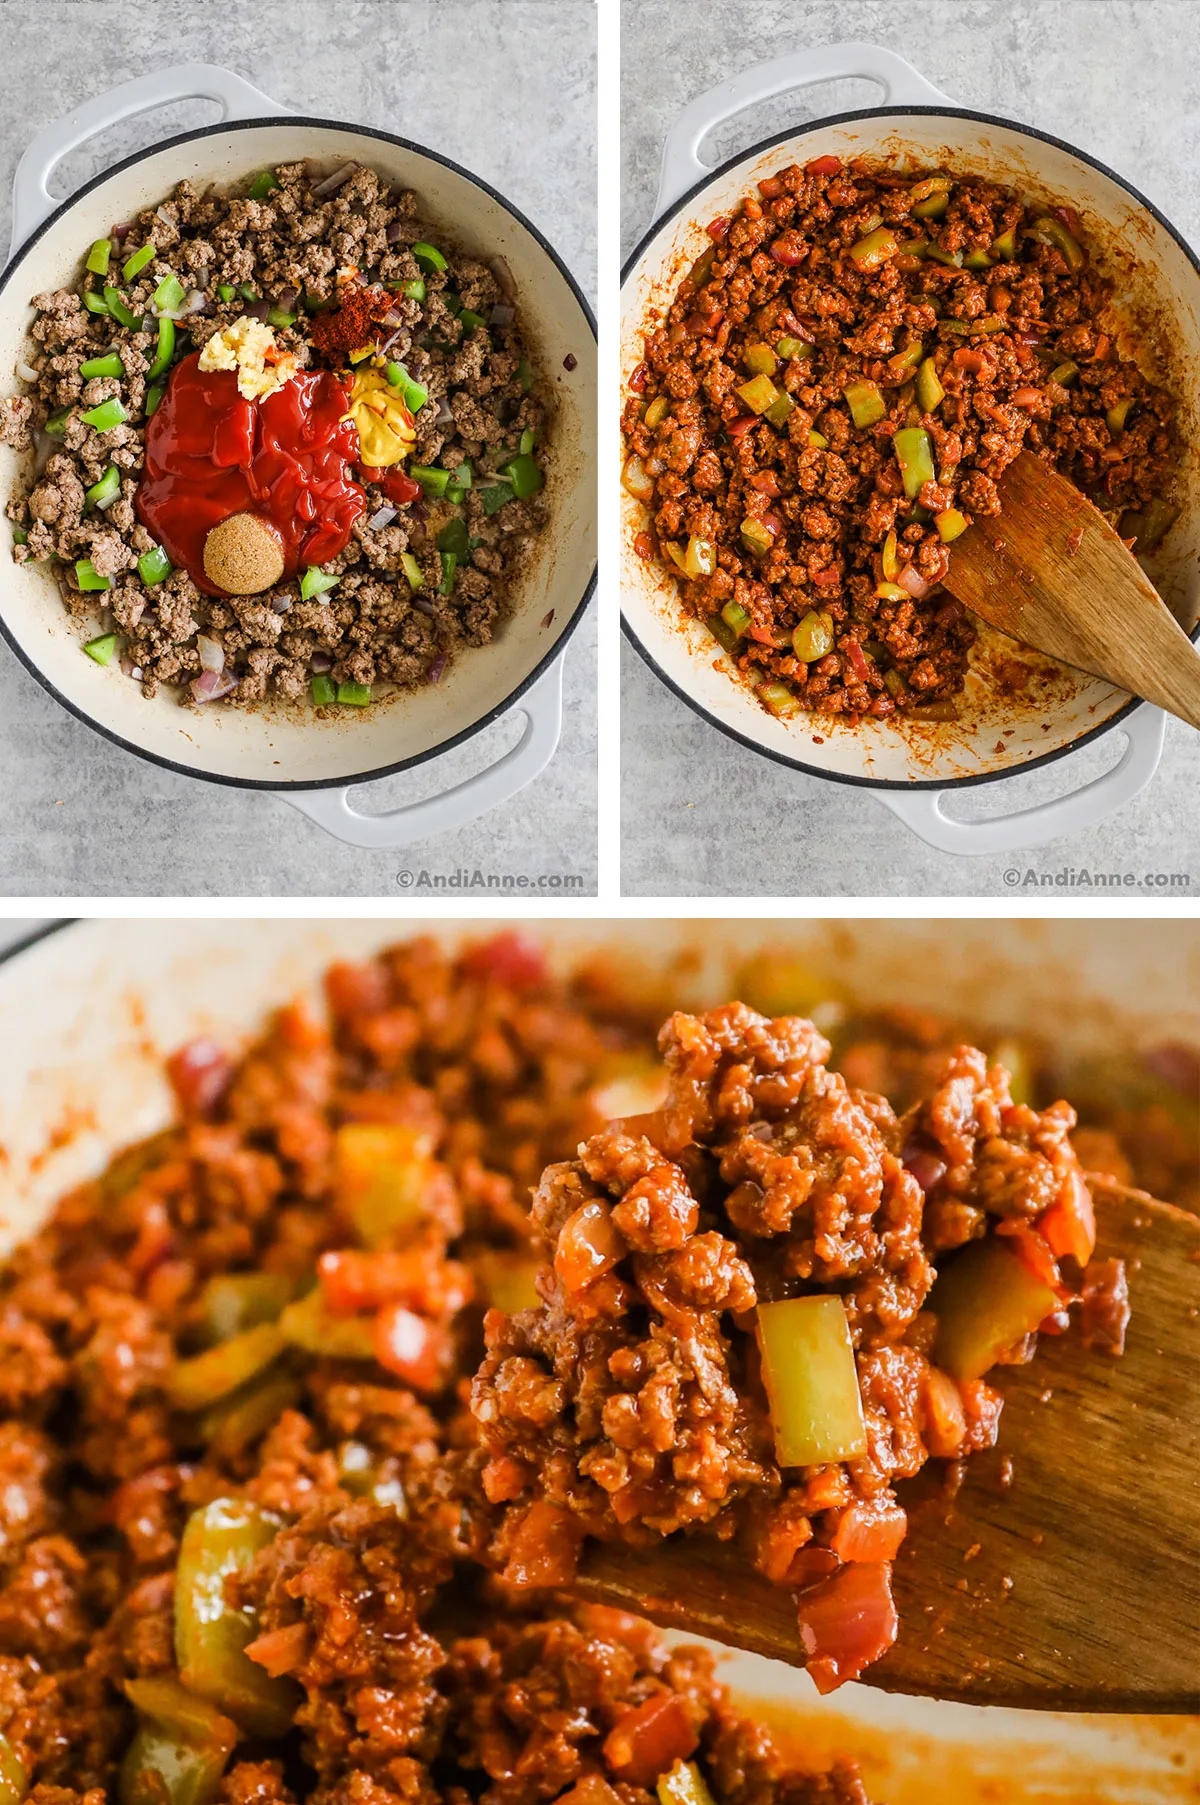 Three images combined. First two are ground beef with bell pepper, onion, and sauces dumped on top. Second is all ingredients mixed together in the pot. Third image is close up of ground beef mixture.